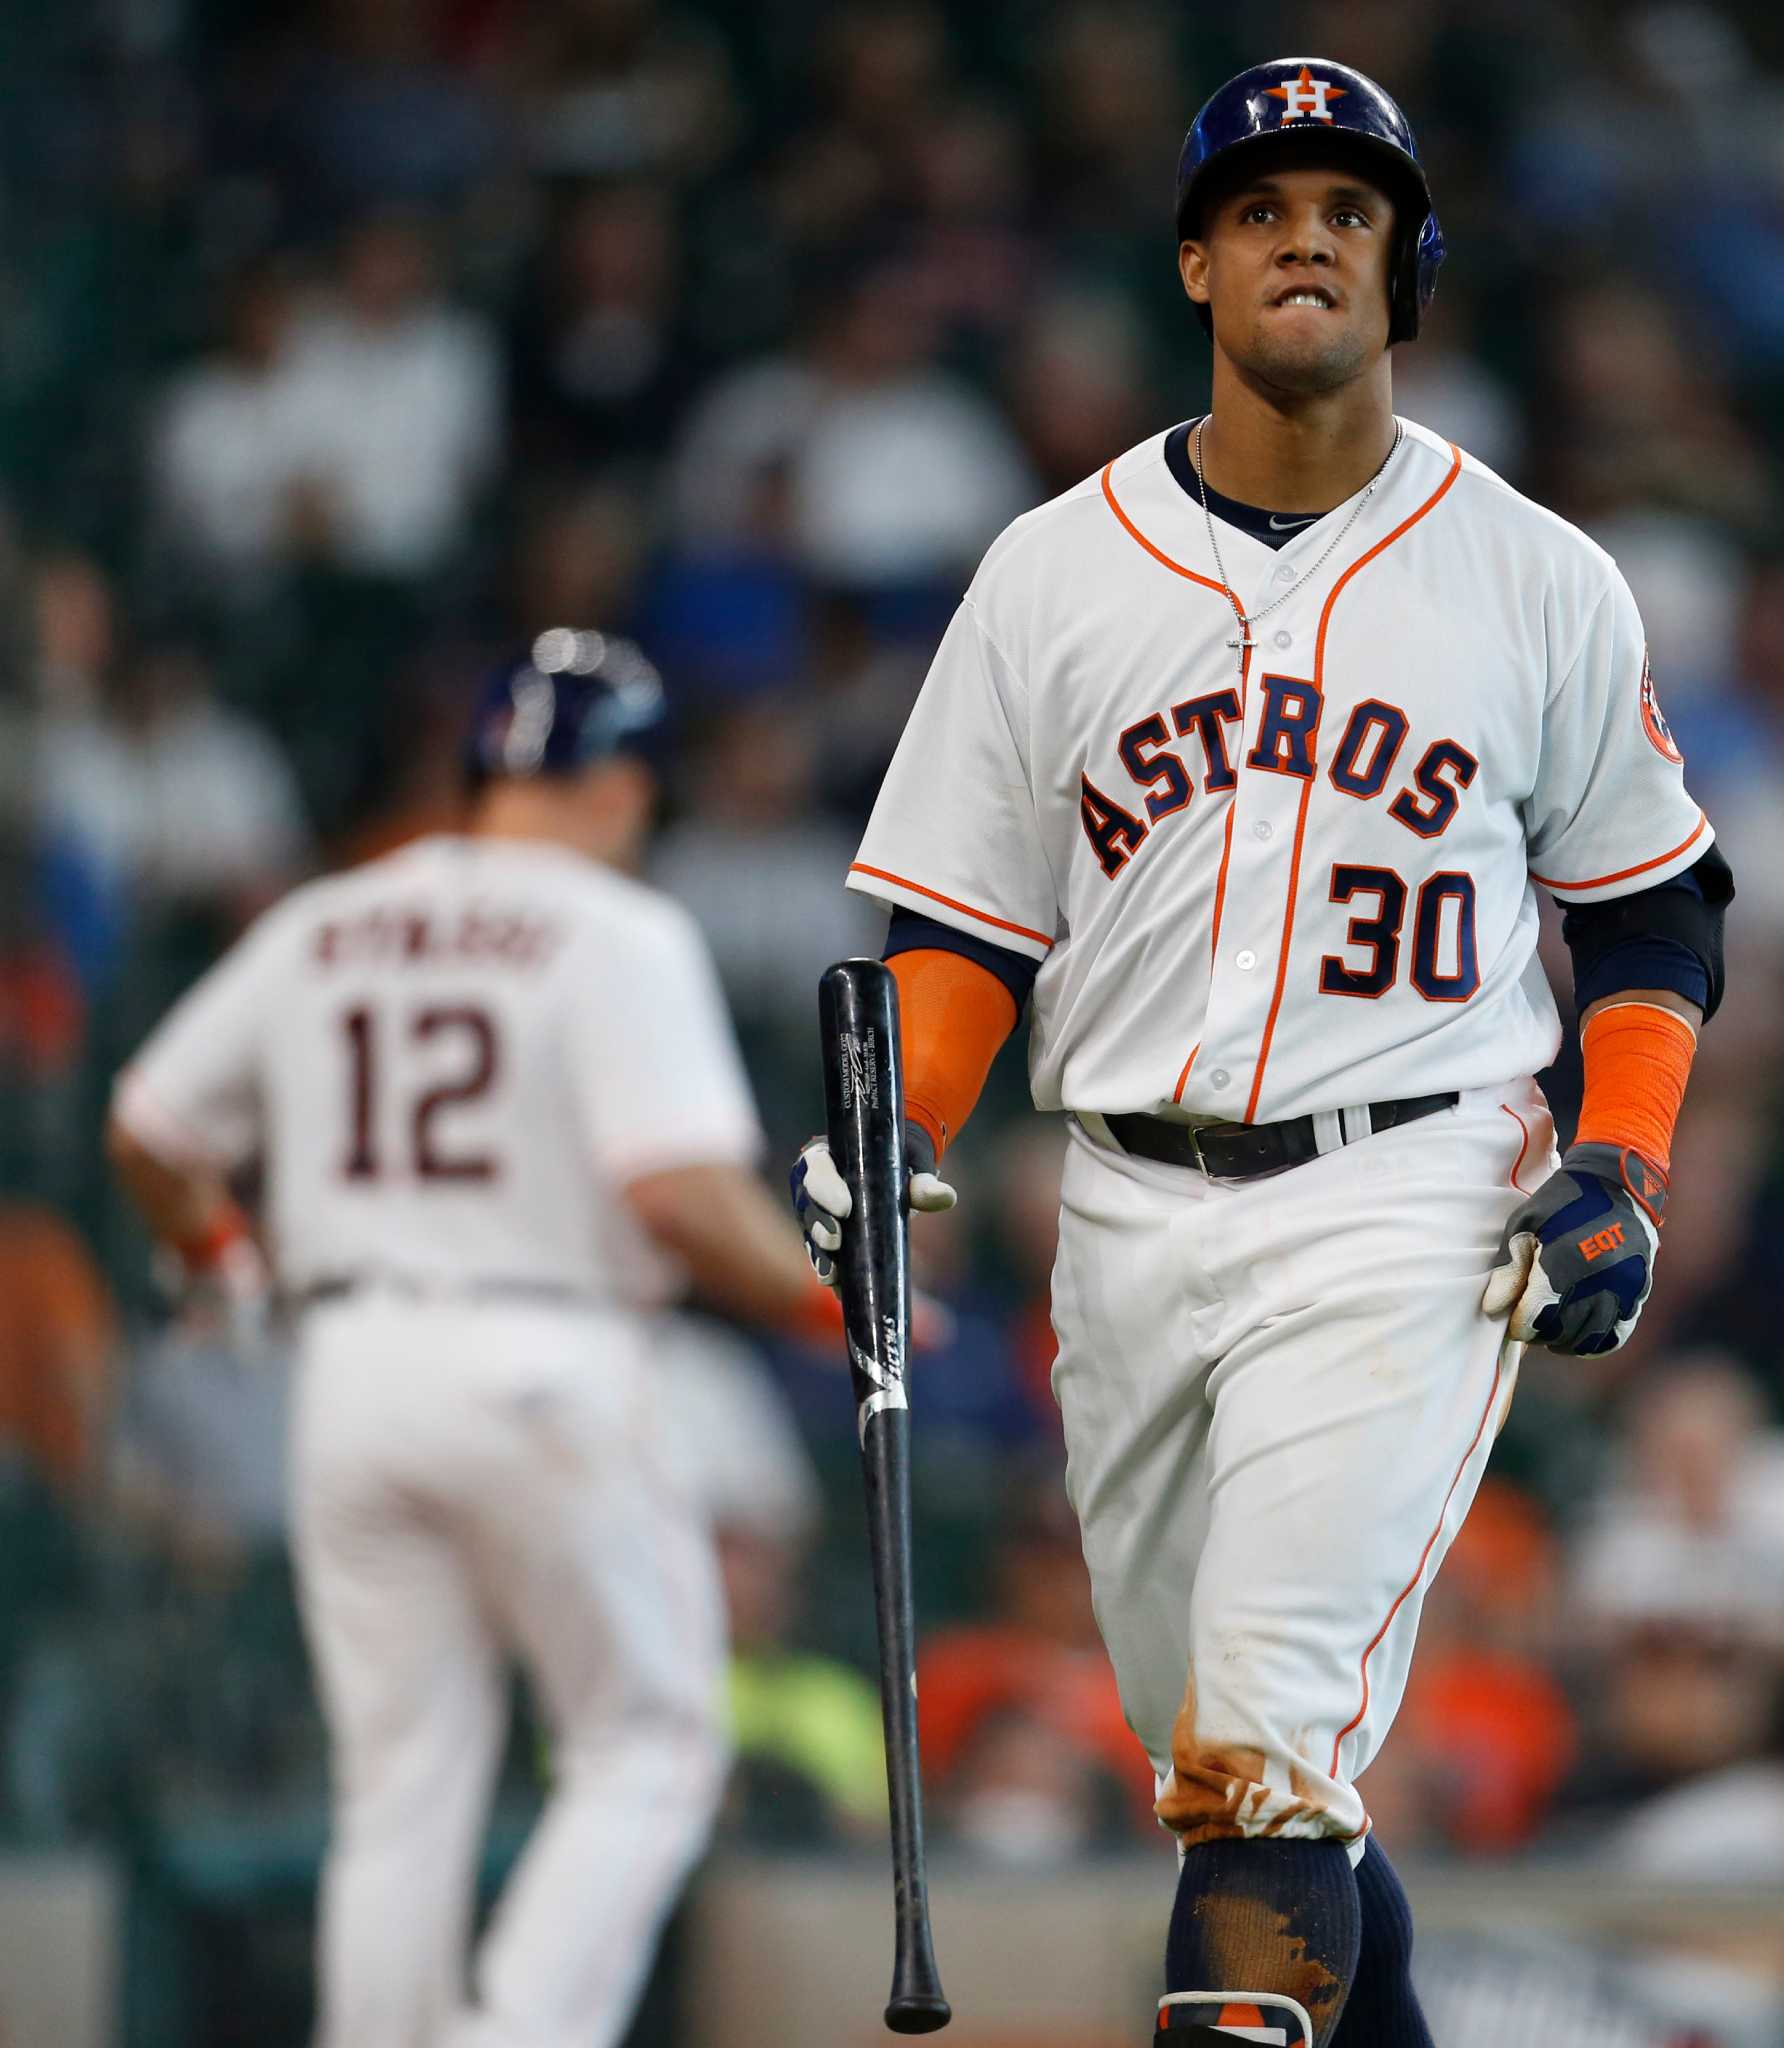 Astros' Carlos Gomez to play twice more with Corpus Christi this weekend